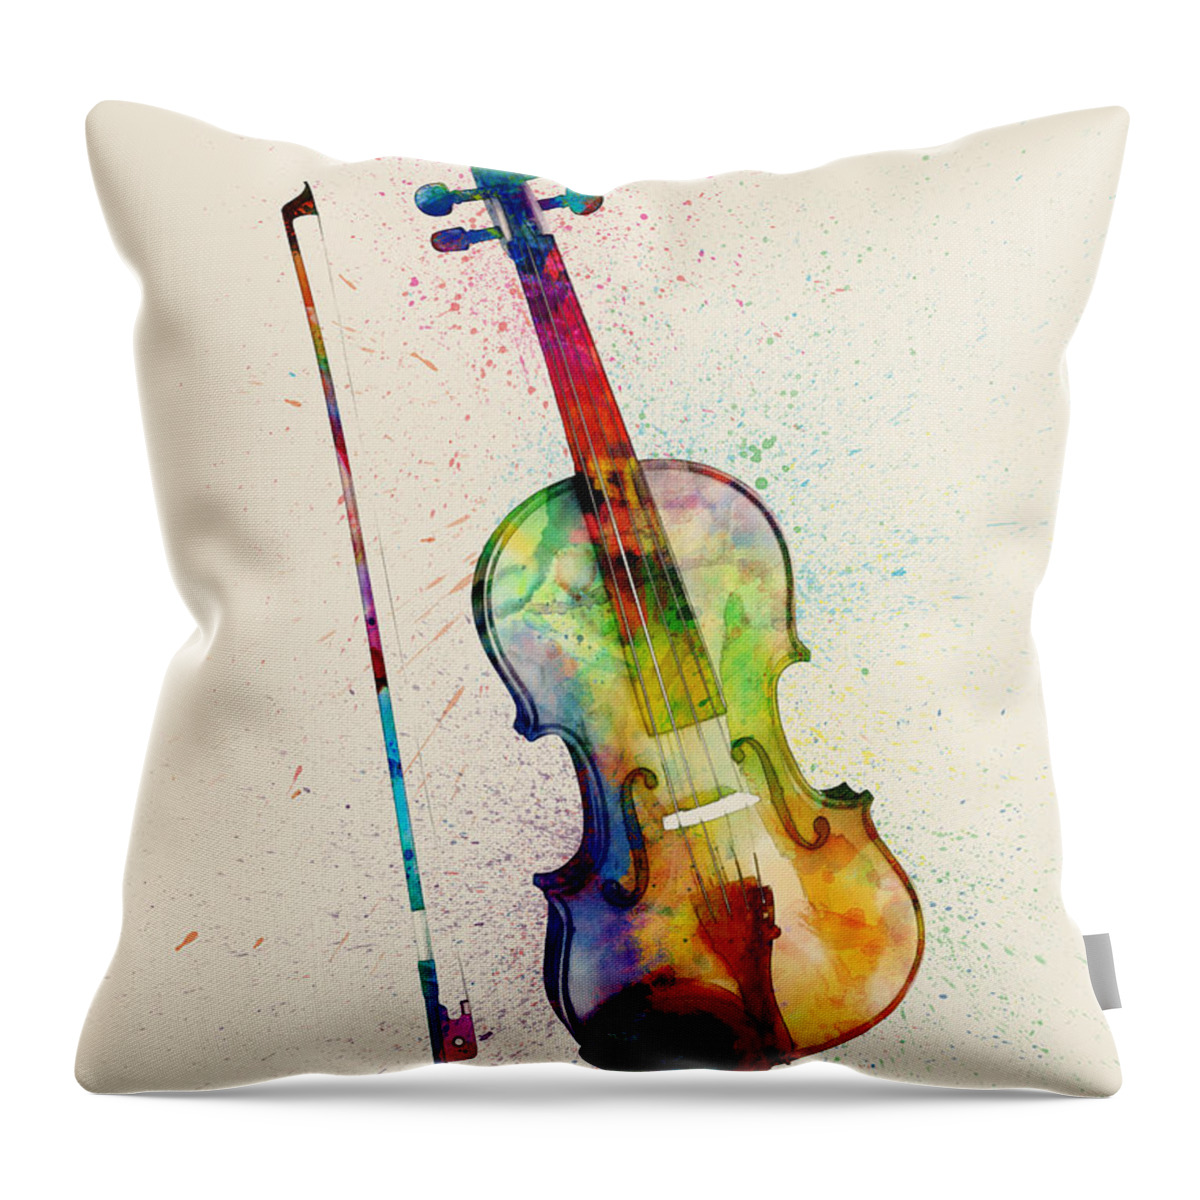 Musical Instrument Throw Pillow featuring the digital art Violin Abstract Watercolor #1 by Michael Tompsett